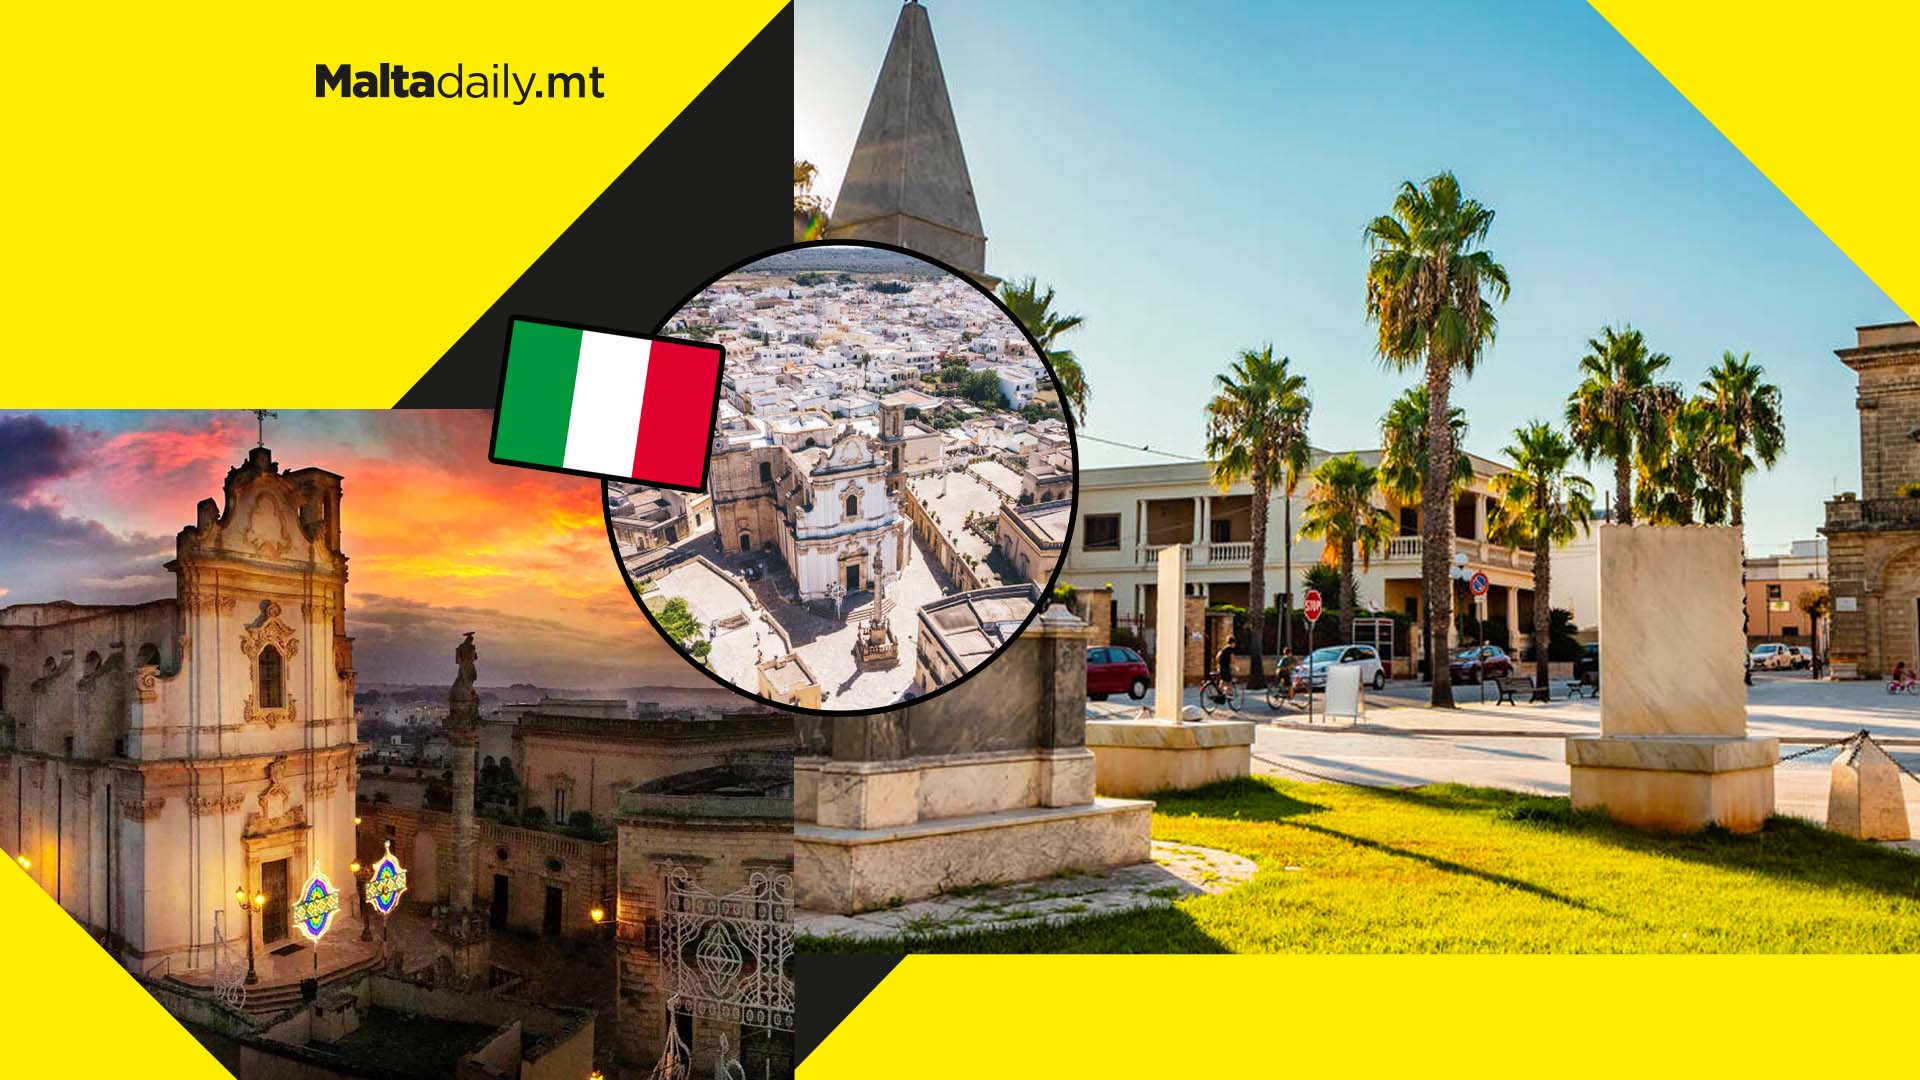 You could earn €30,000 by moving to this Italian town